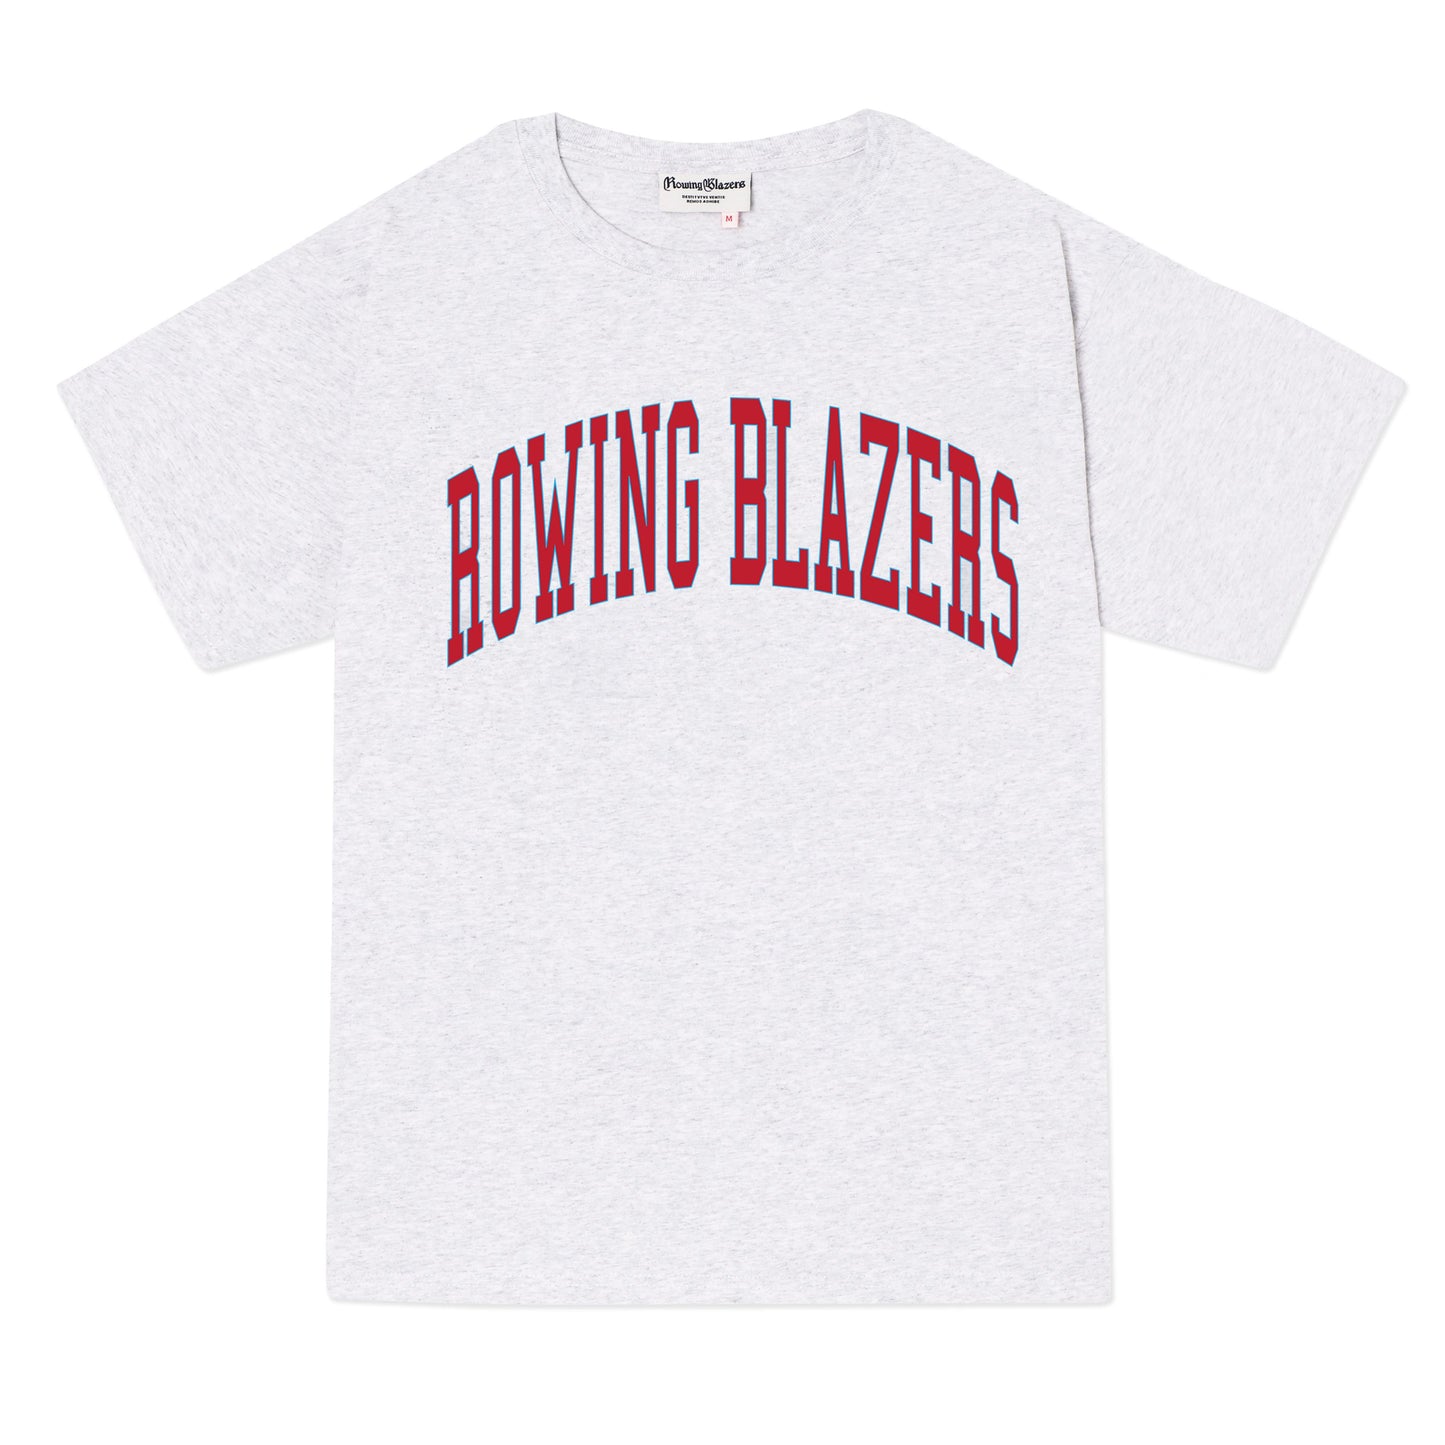 Classic light heather gray collegiate tee with "Rowing Blazers" across the front in red.